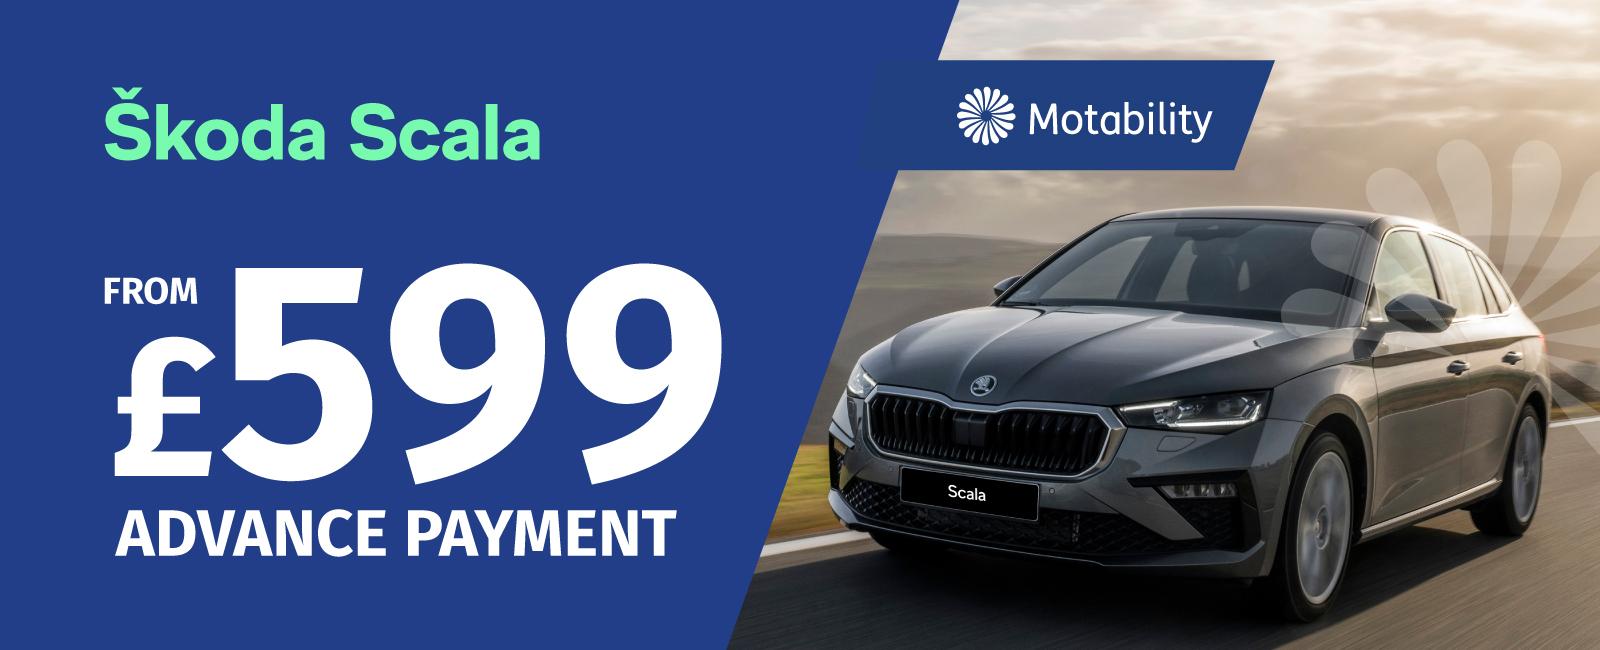 The Skoda Scala from £599 advance payment on the Motability Scheme